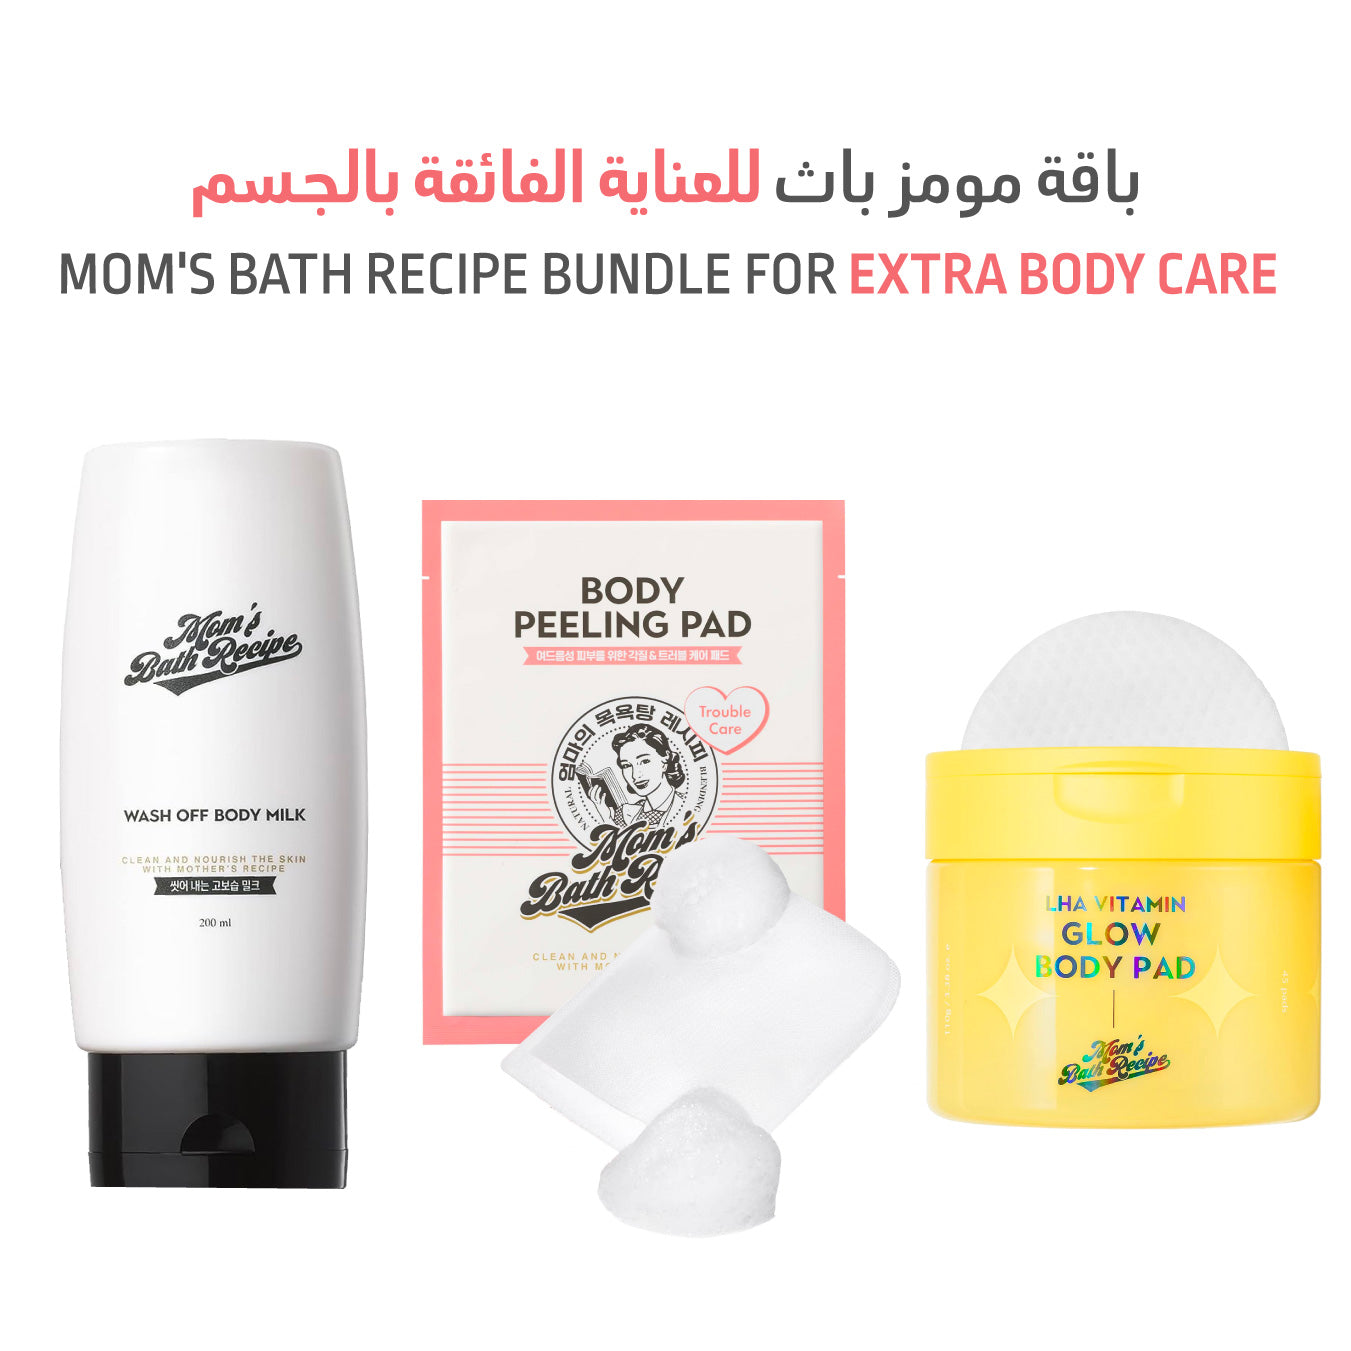 moms Bath Ul﻿timate Body Care Package